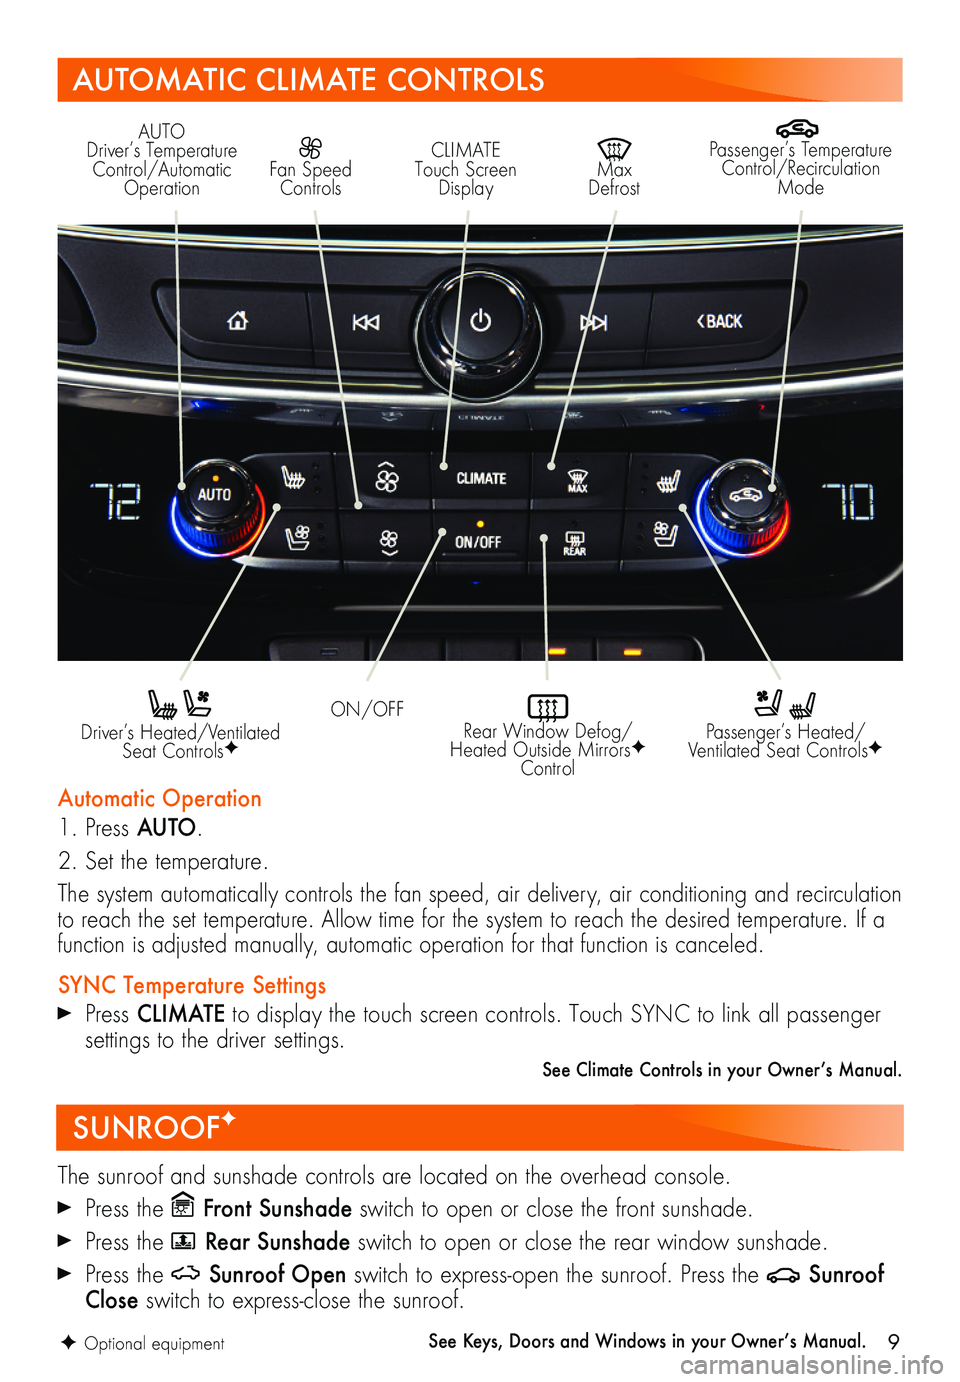 BUICK LACROSSE 2019  Get To Know Guide 9
SUNROOFF
The sunroof and sunshade controls are located on the overhead console.
 Press the Front Sunshade switch to open or close the front sunshade. 
 Press the  Rear Sunshade switch to open or clo